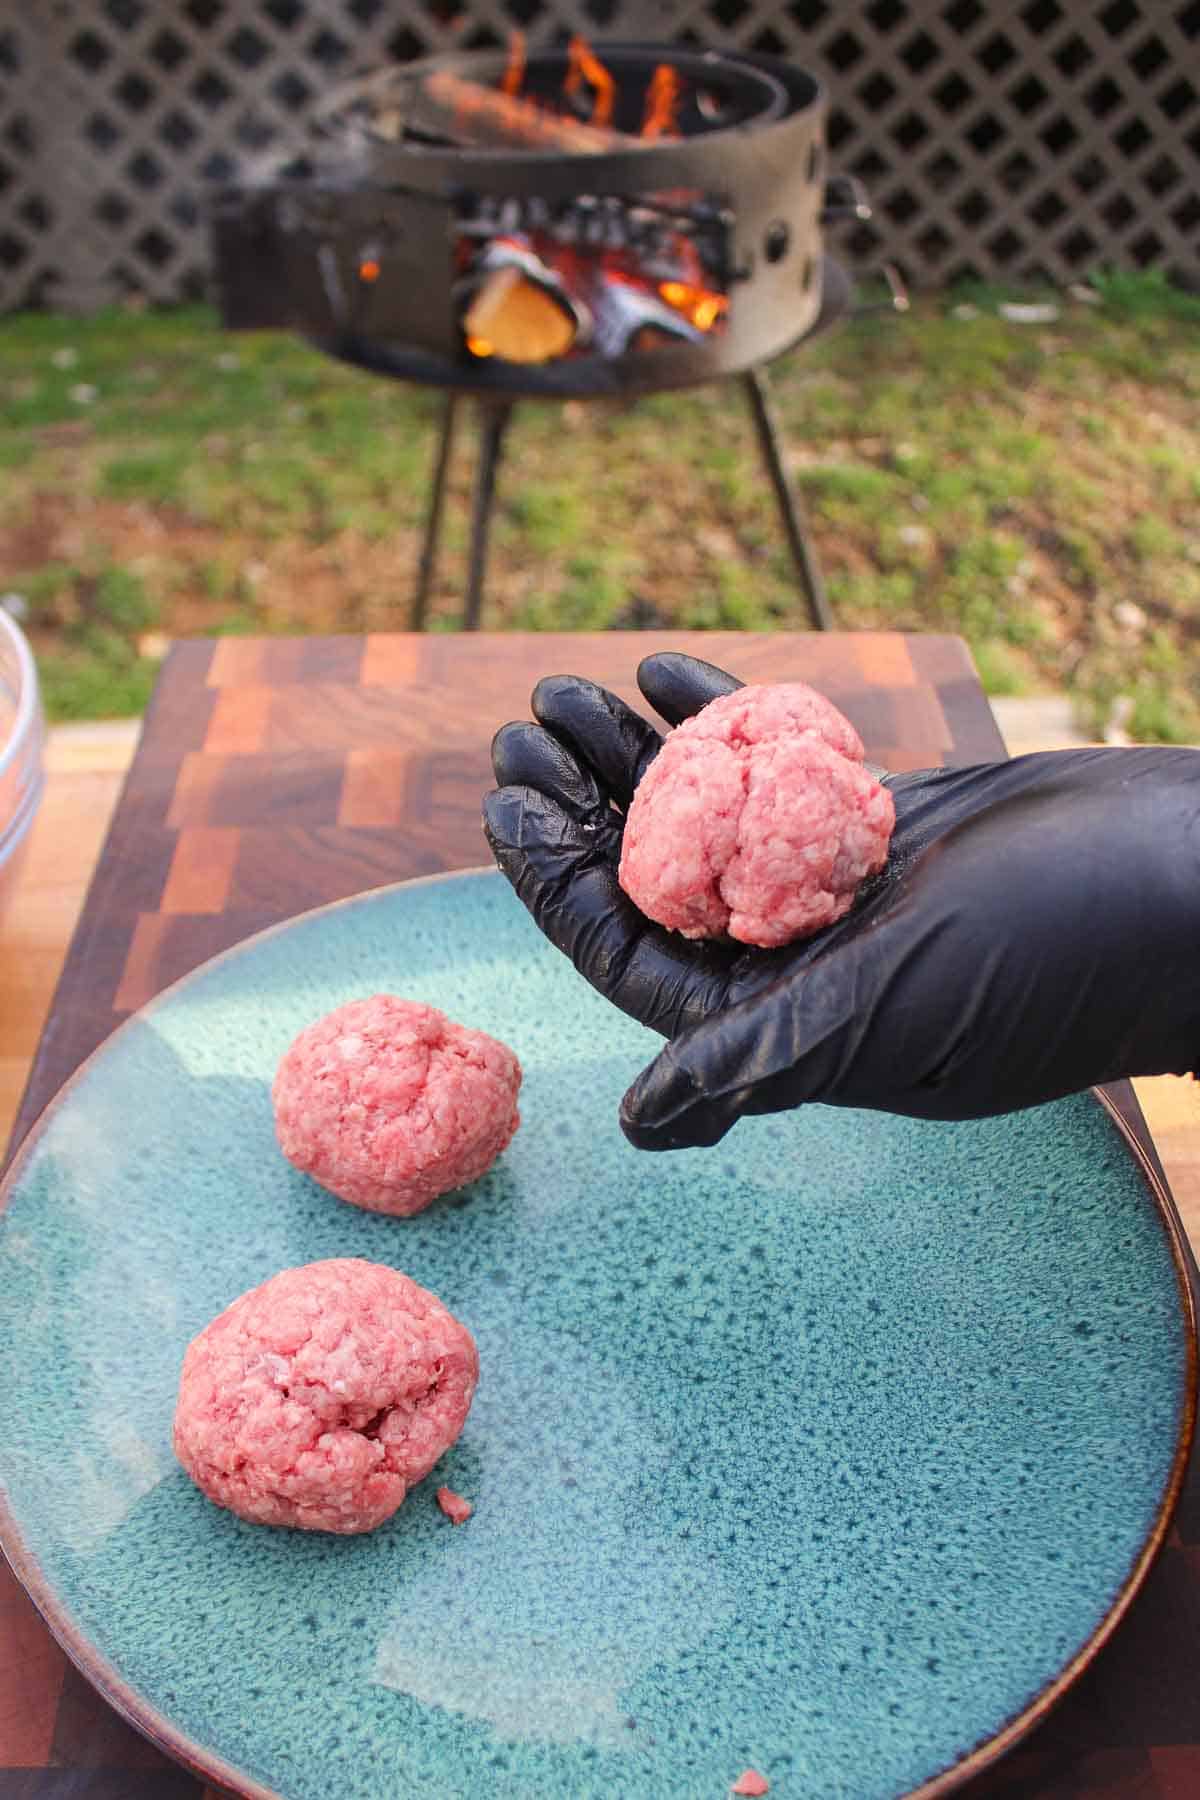 The burger balls formed and ready to be set on the grill.